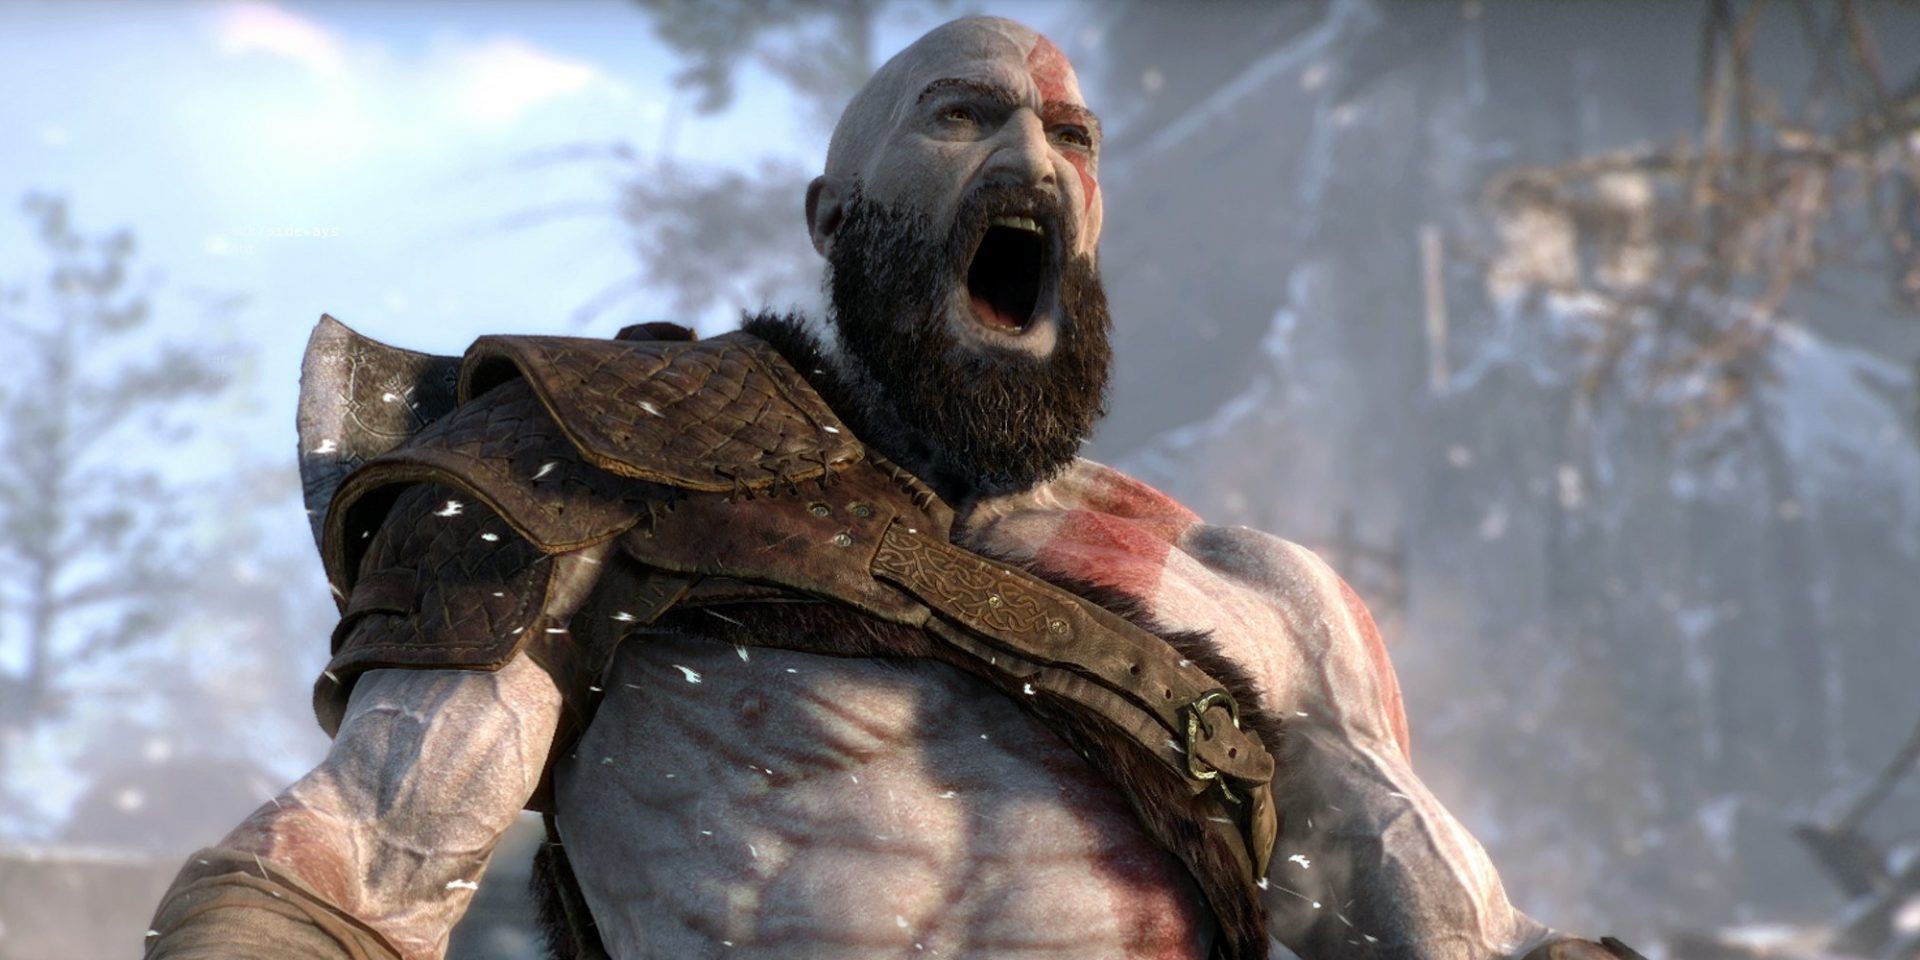 Kratos releases his Spartan rage on a troll.